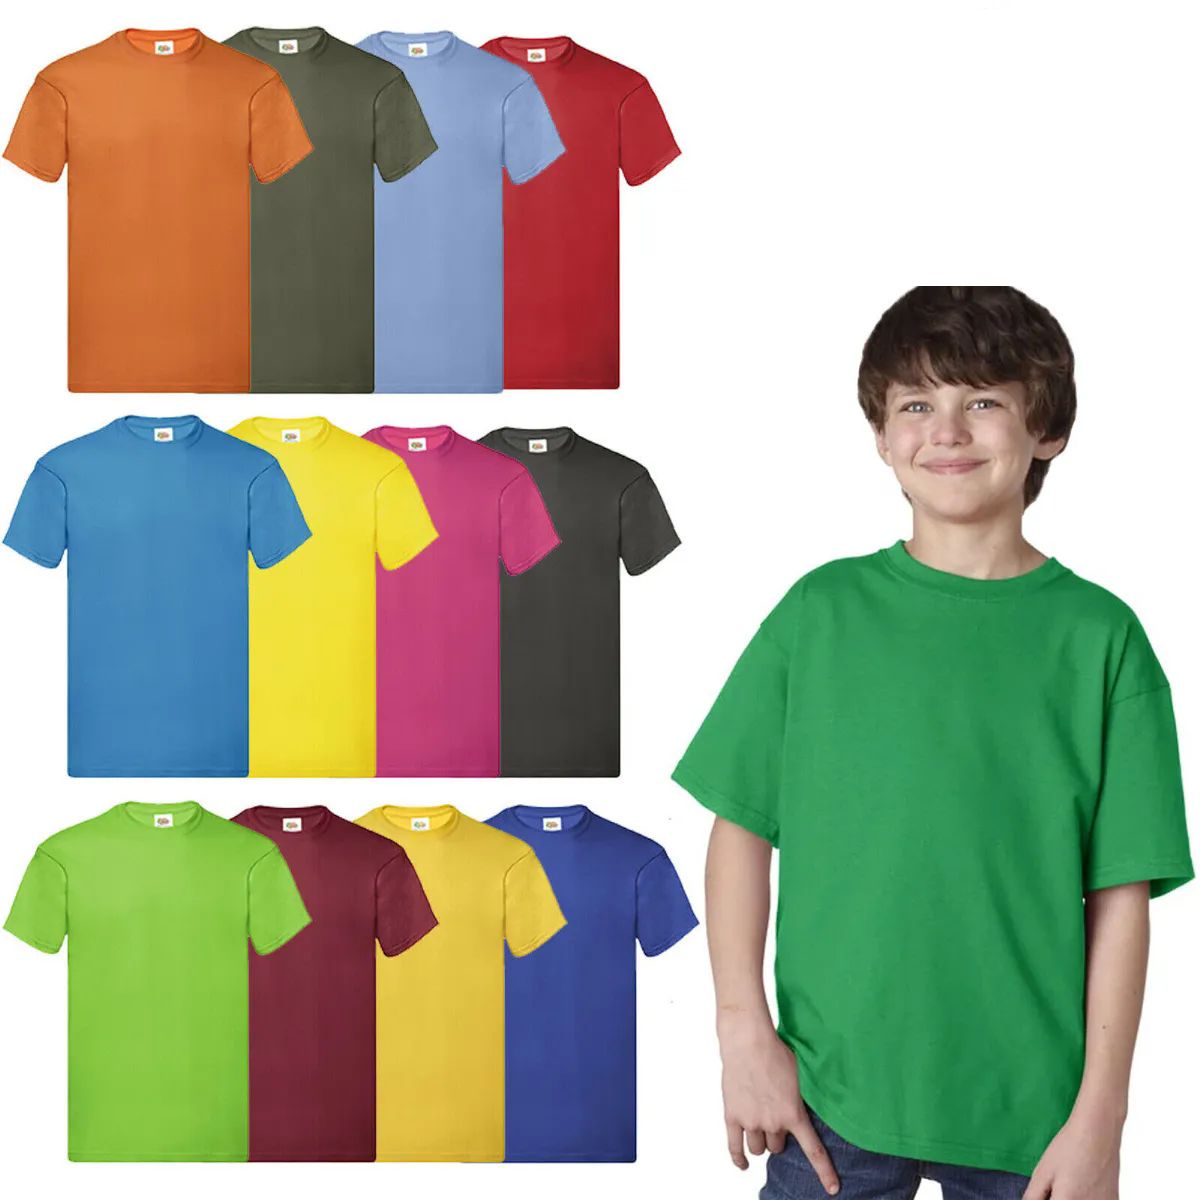 576 Pieces of Billion Hats Kids Youth Cotton Assorted Colors T Shirts Size XL